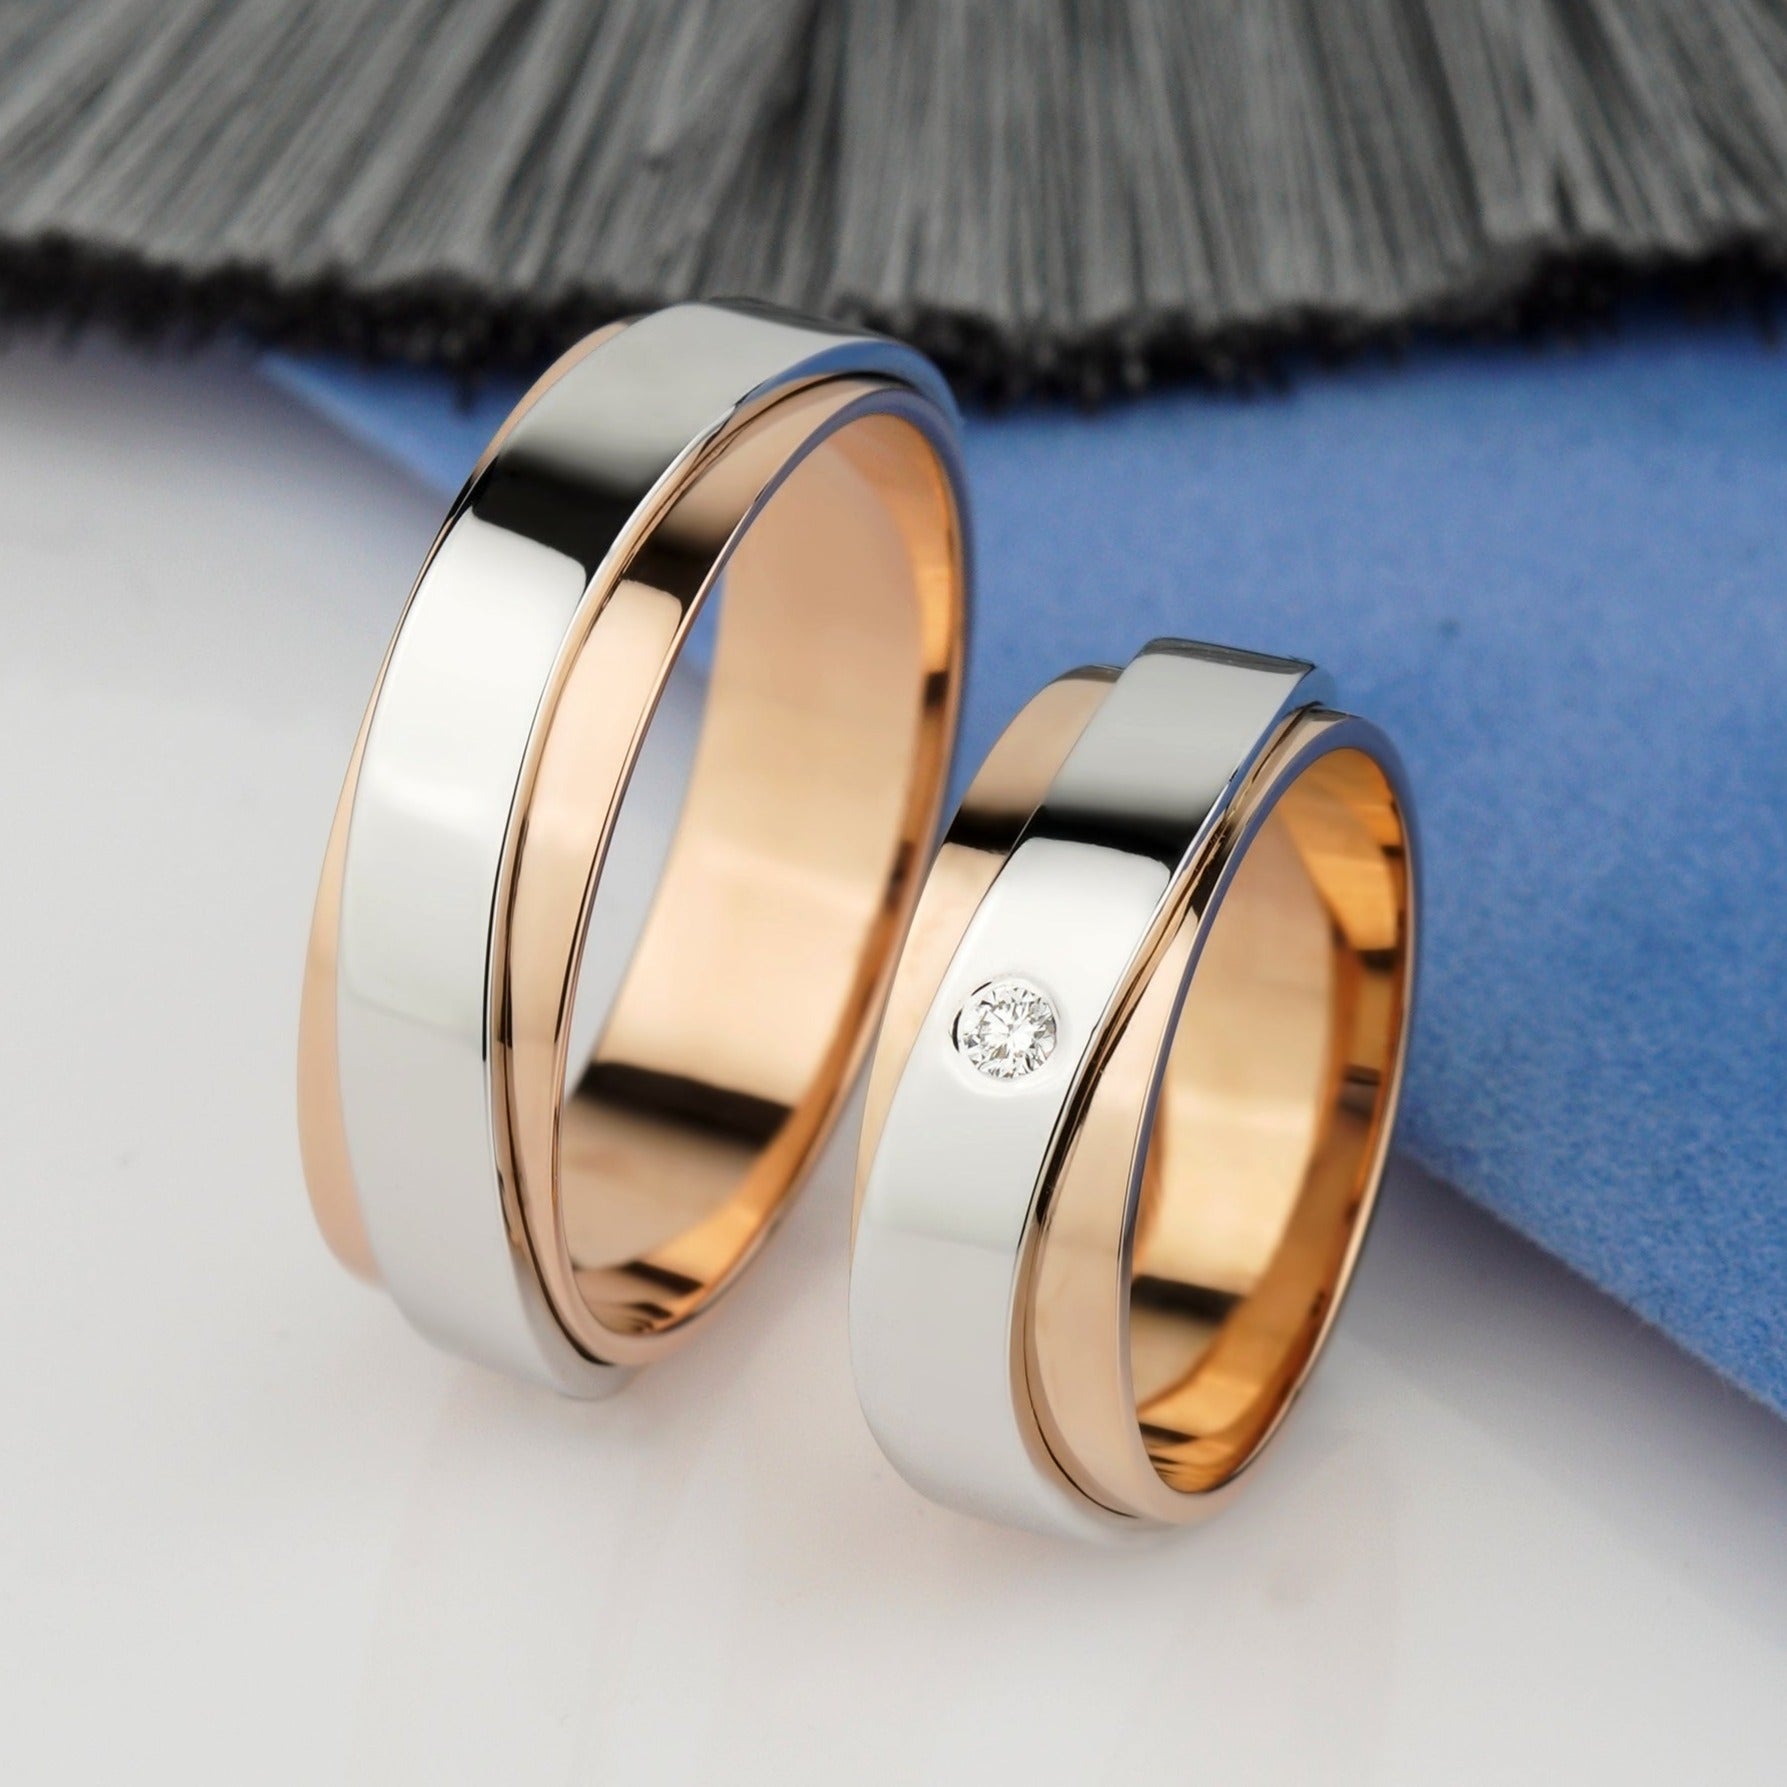 Matching couple rings set. Gold wedding bands set. Promise rings. Unique wedding bands. Two tone wedding bands. His and hers wedding bands. Unusual wedding rings. His and hers gold rings. Two tone wedding bands 